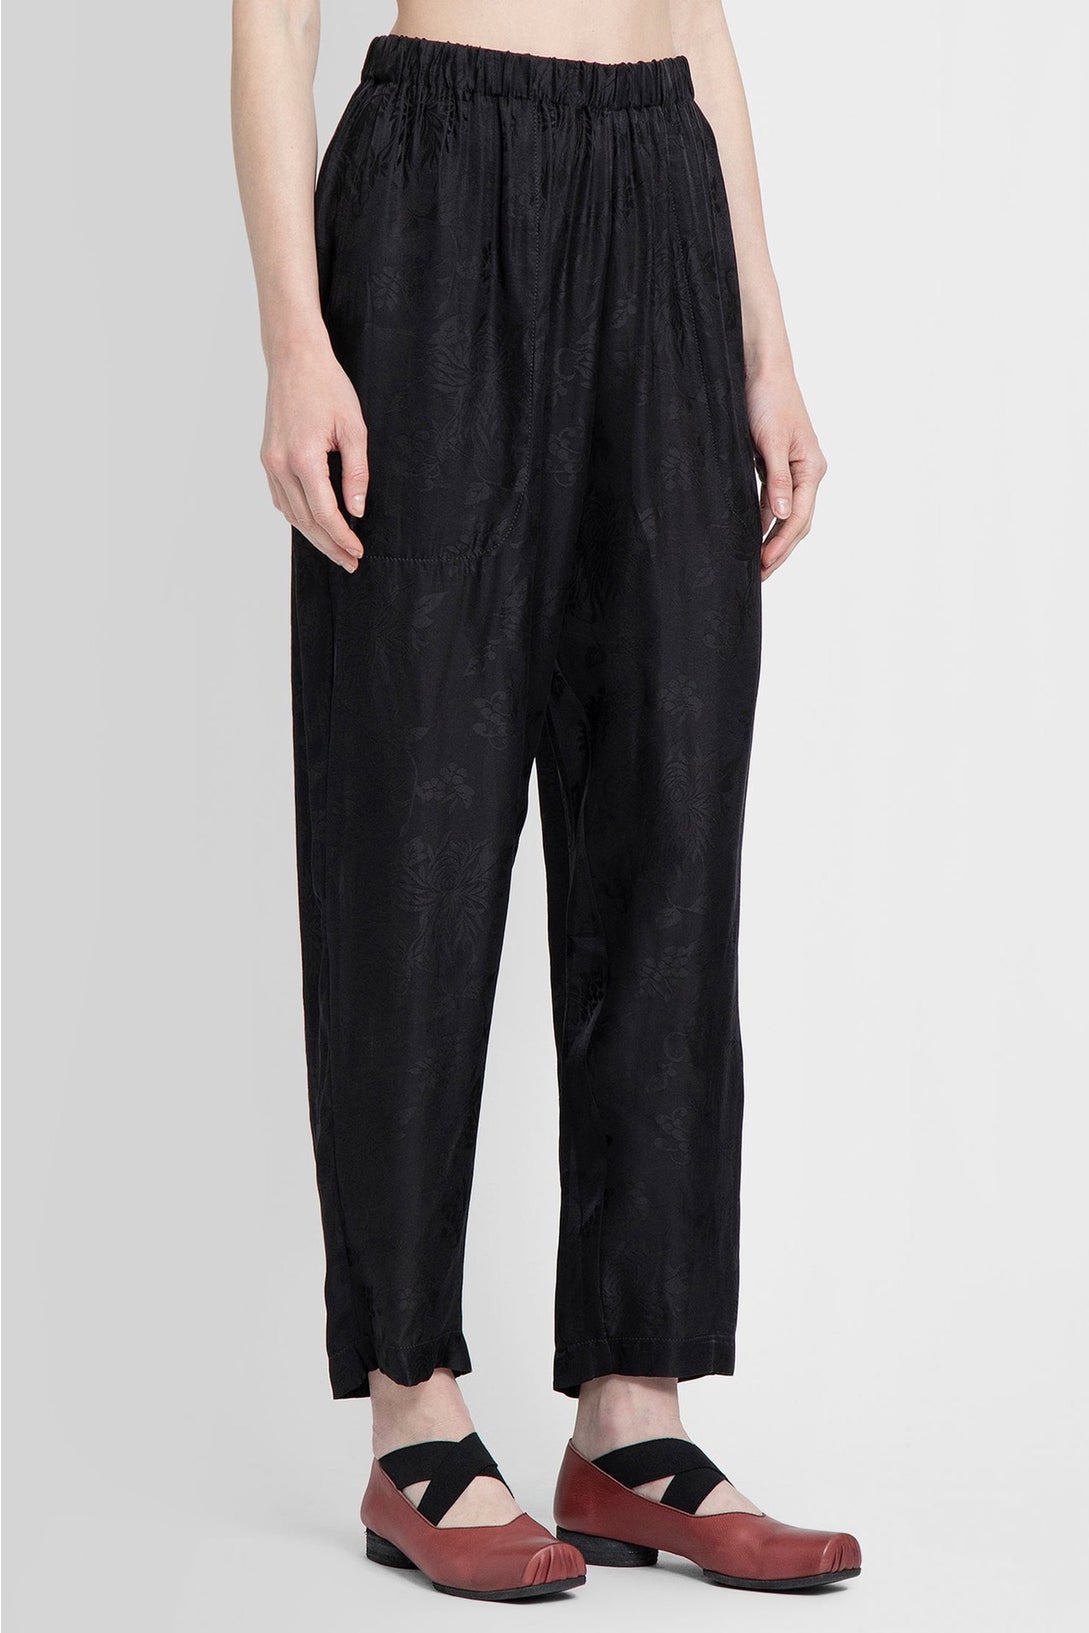 https://www.theshelteronline.com/content/products/Palmer-Pant-Black-04.jpg?canvas=2:3&width=1088